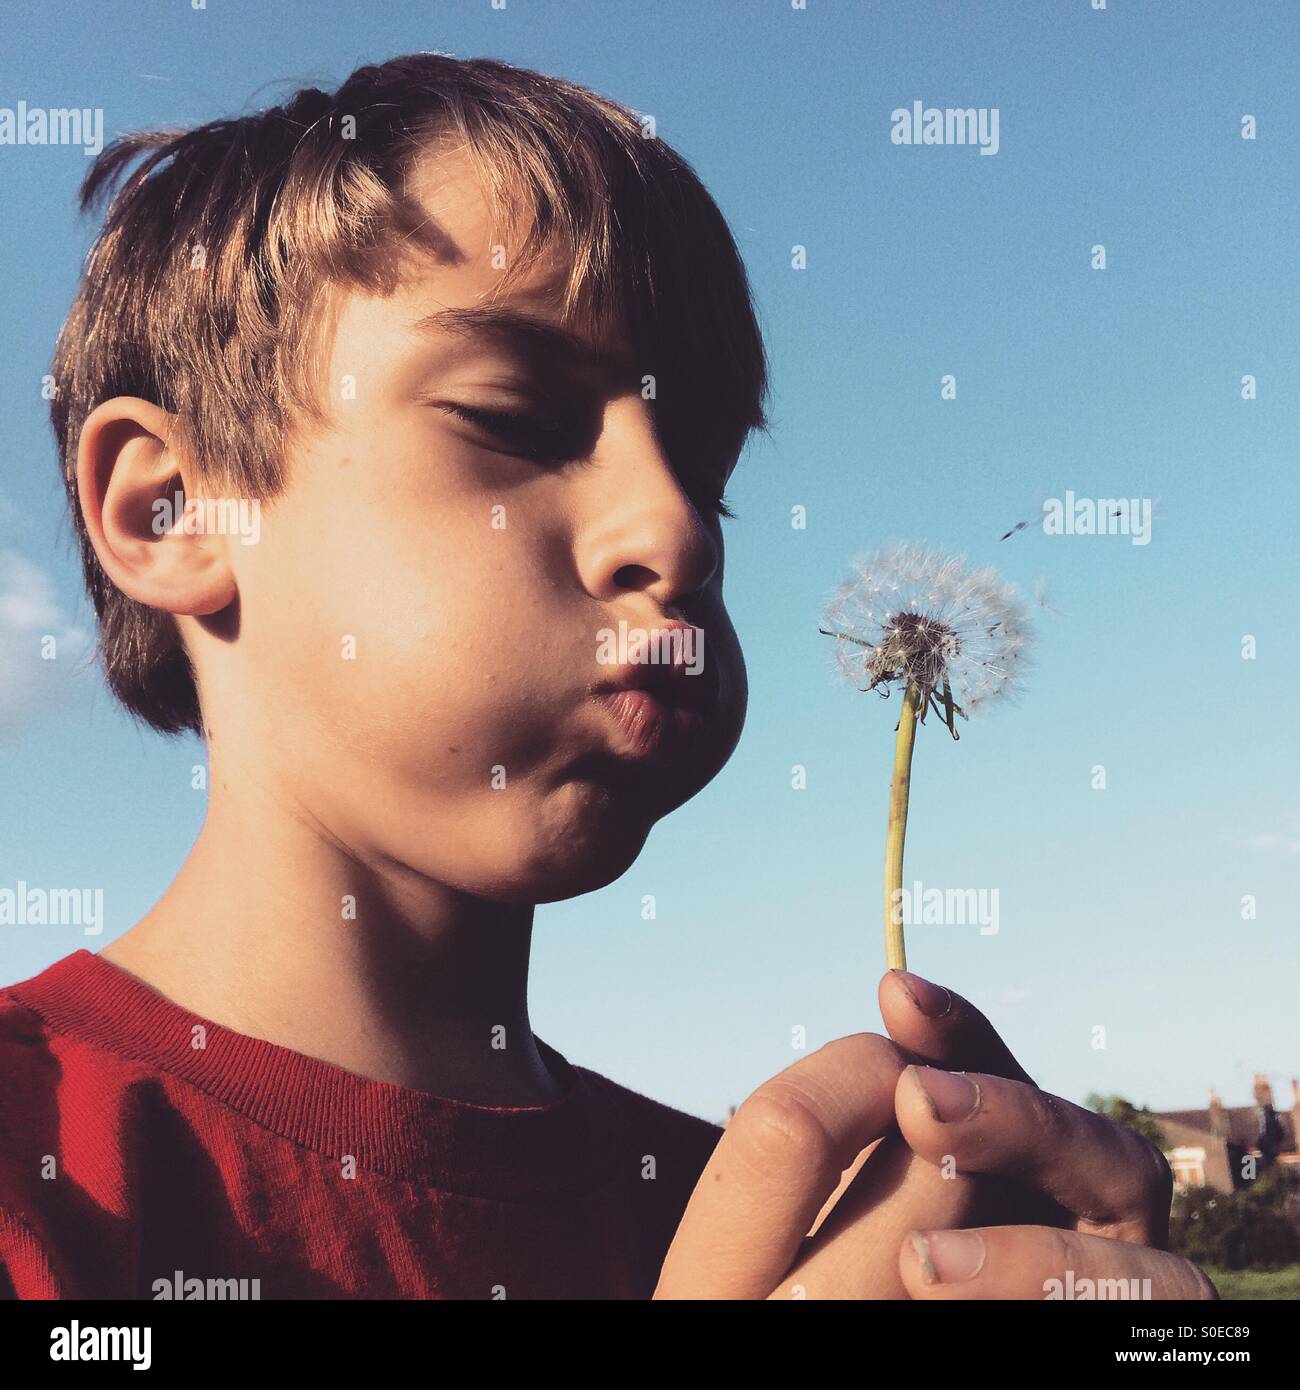 A young boy blowing a dandelion. Stock Photo